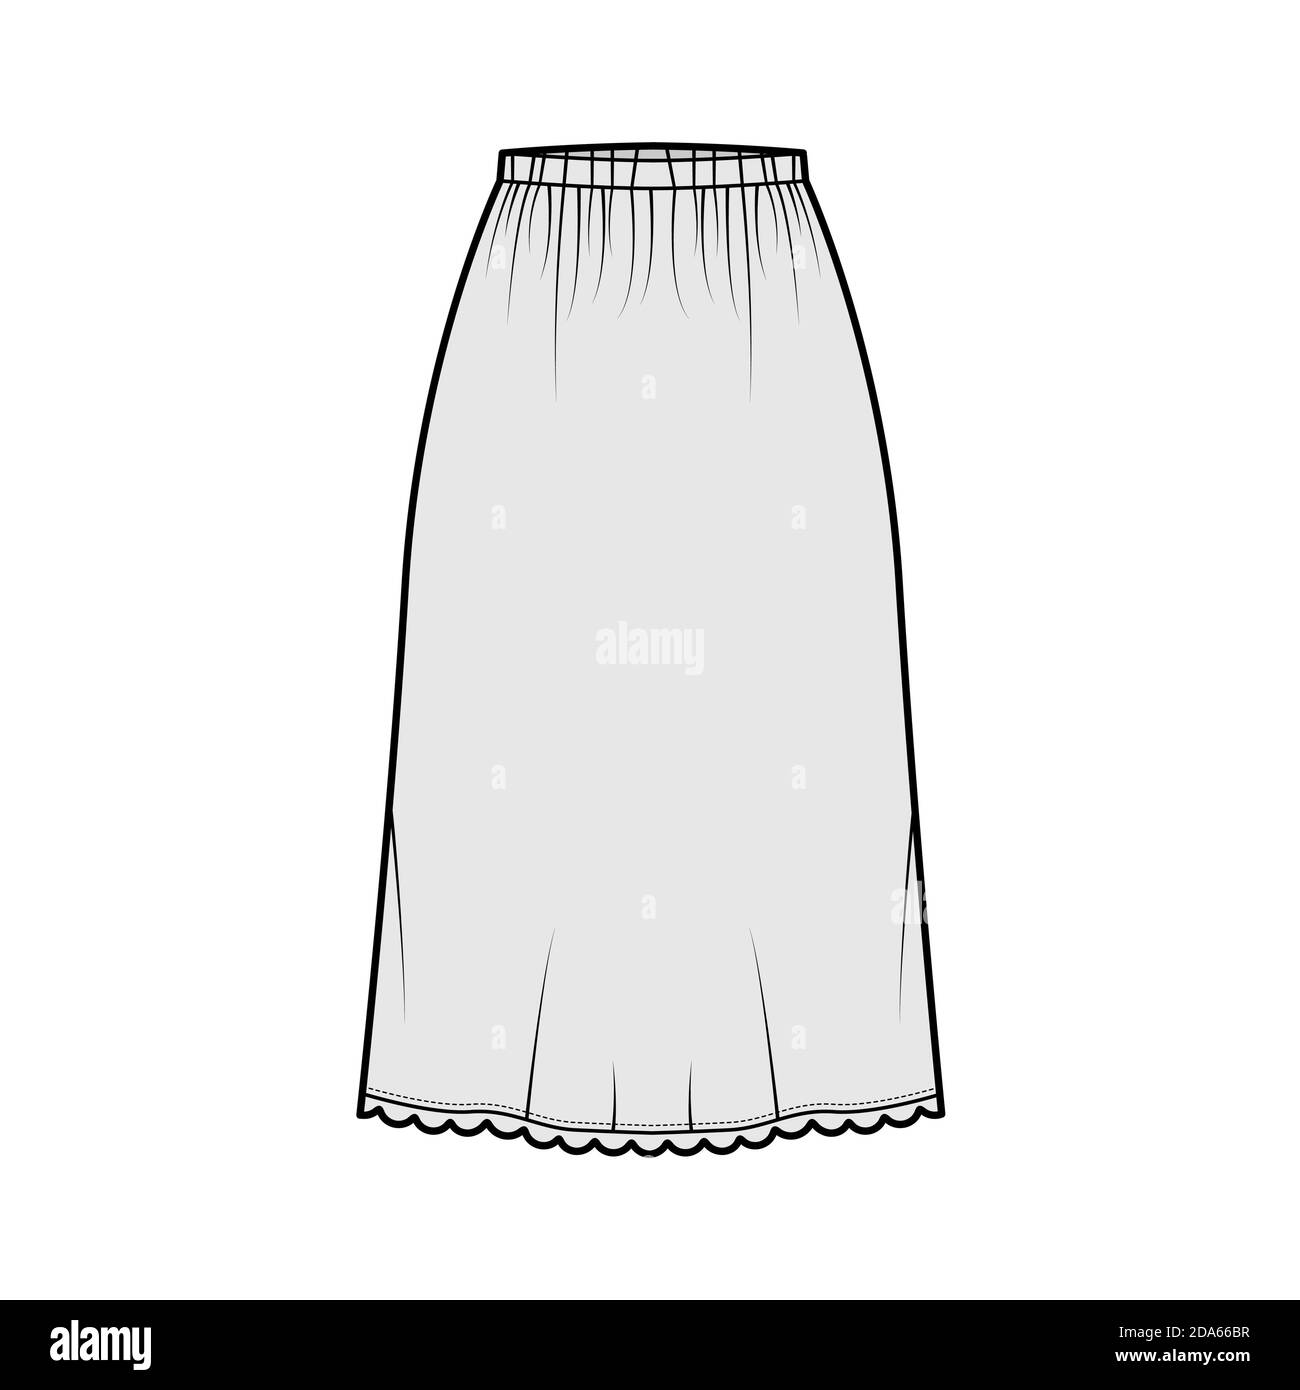 Skirt slip dirndl technical fashion illustration with below-the